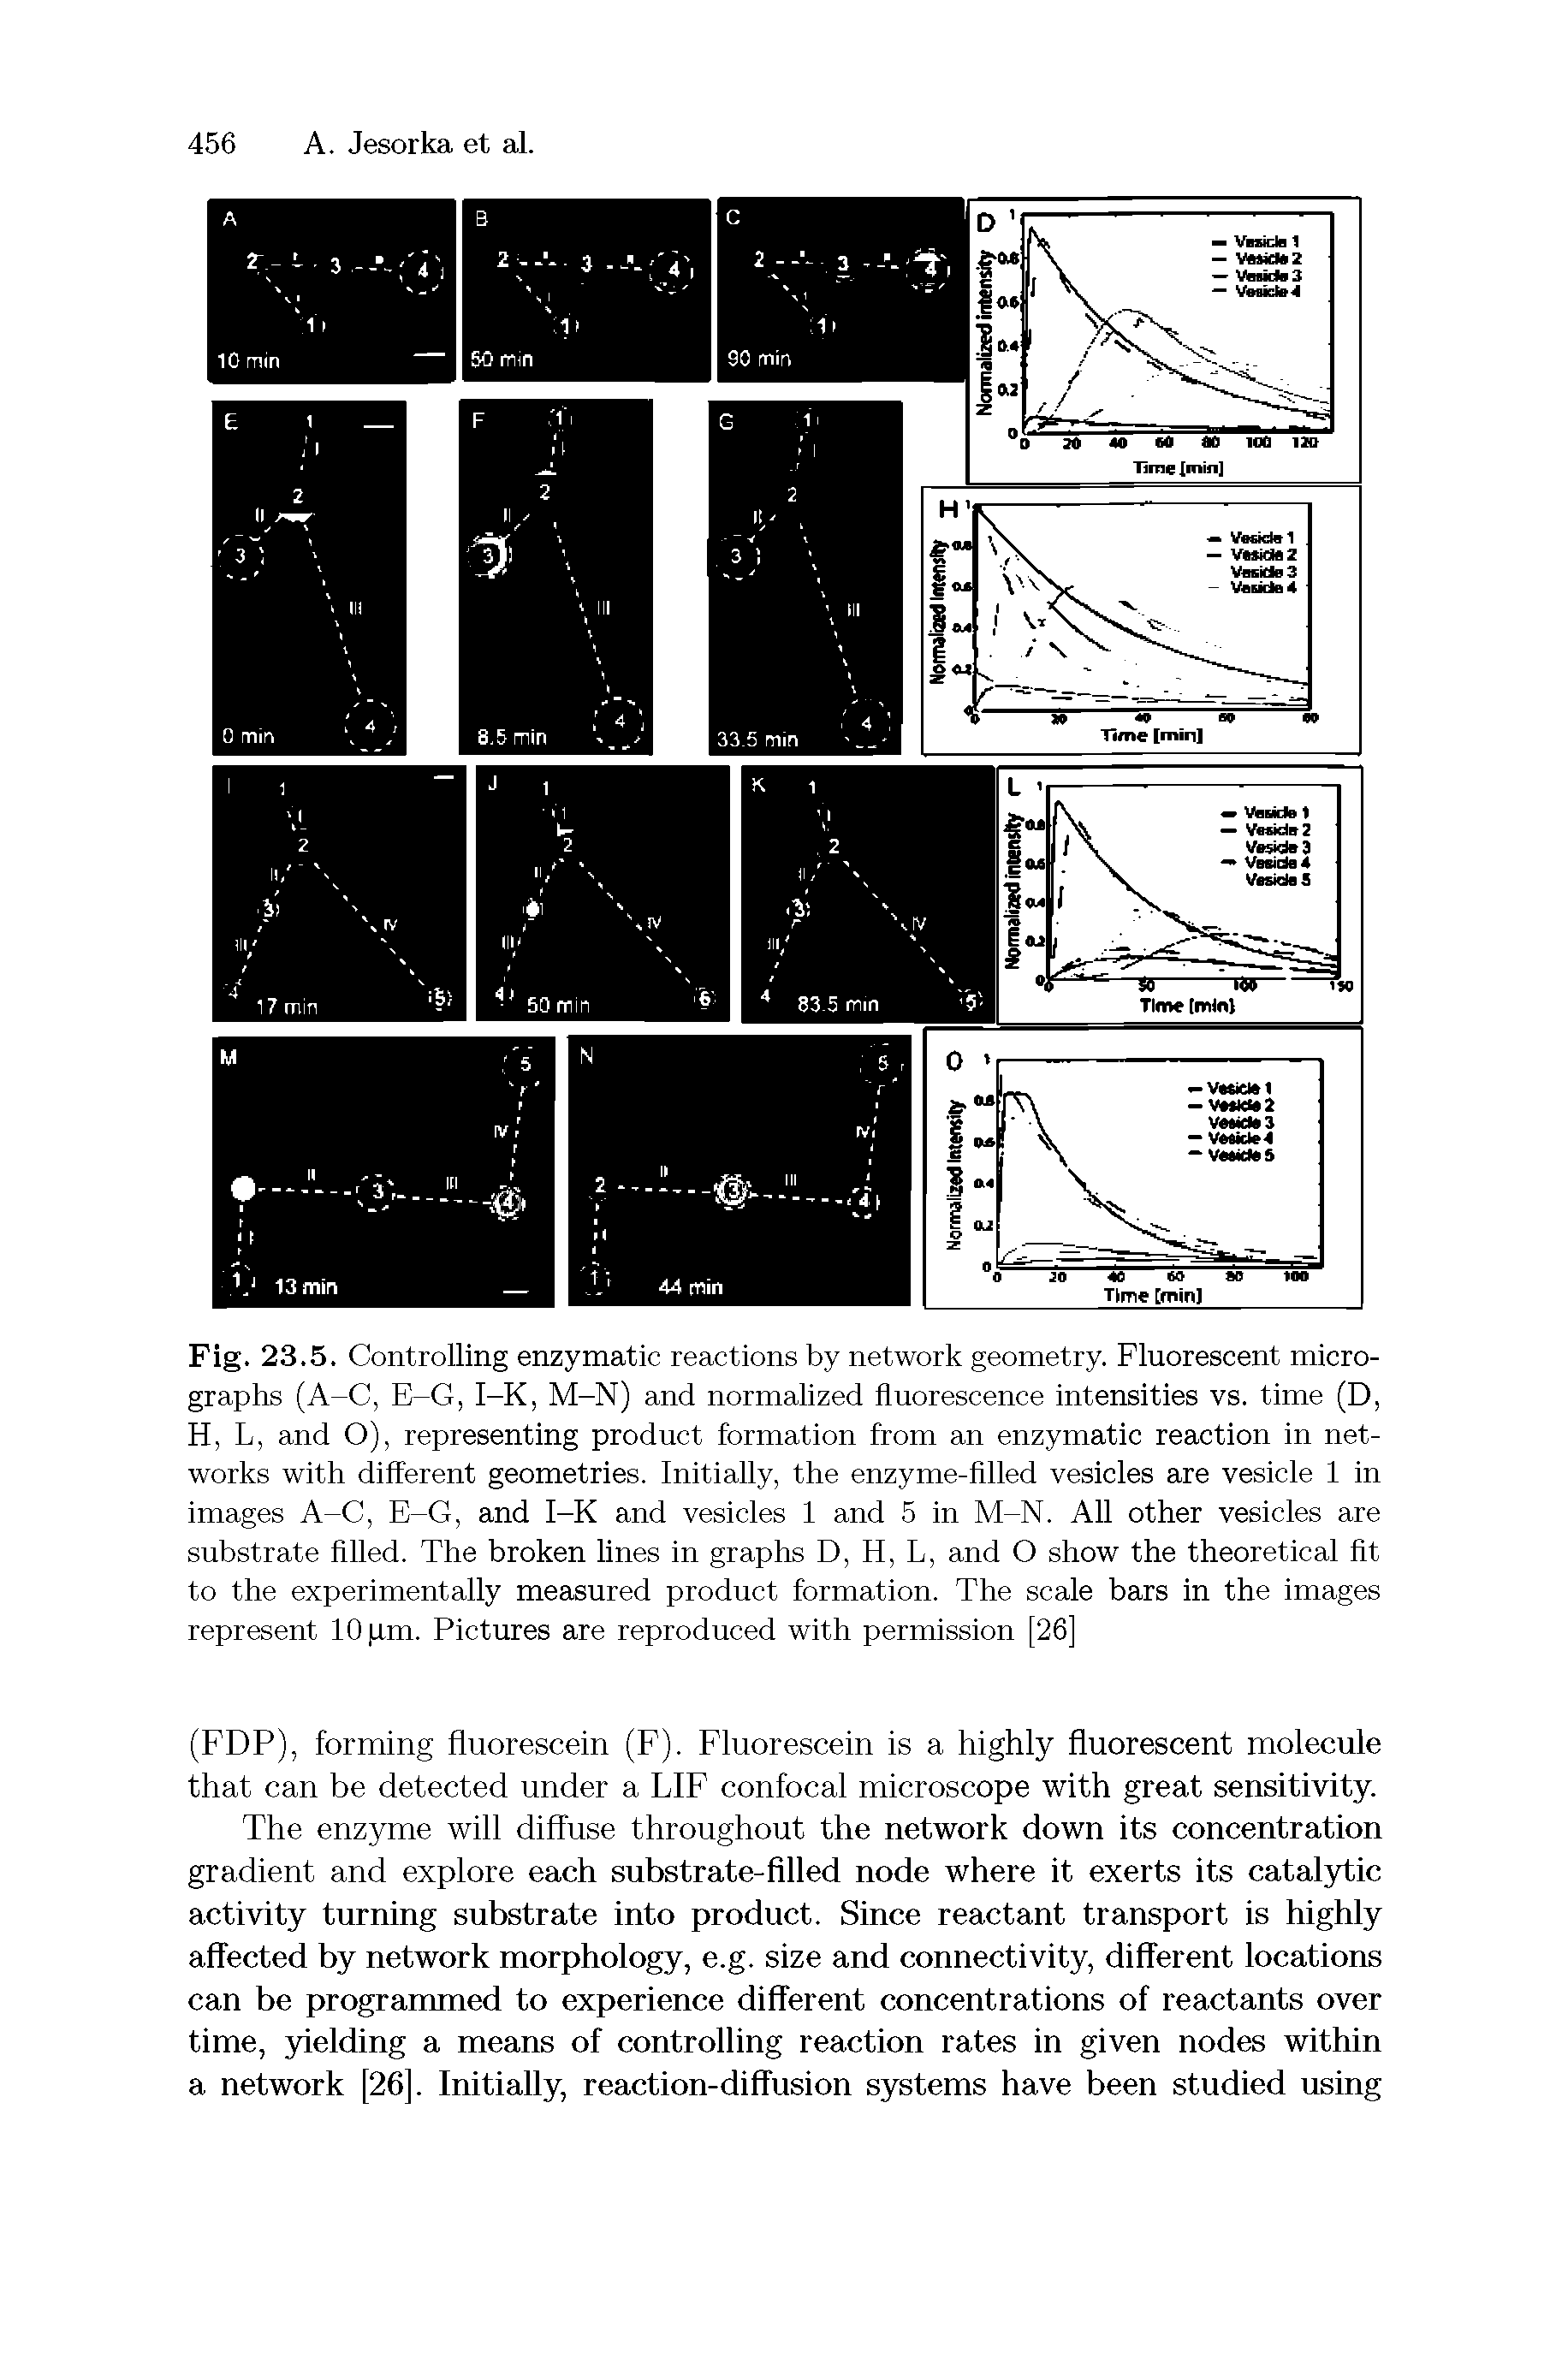 Fig. 23.5. Controlling enzymatic reactions by network geometry. Fluorescent micrographs (A-C, E-G, I-K, M-N) and normalized fluorescence intensities vs. time (D, H, L, and O), representing product formation from an enzymatic reaction in networks with different geometries. Initially, the enzyme-filled vesicles are vesicle 1 in images A-C, E-G, and I-K and vesicles 1 and 5 in M-N. All other vesicles are substrate filled. The broken lines in graphs D, H, L, and O show the theoretical fit to the experimentally measured product formation. The scale bars in the images represent fOpm. Pictures are reproduced with permission [26]...